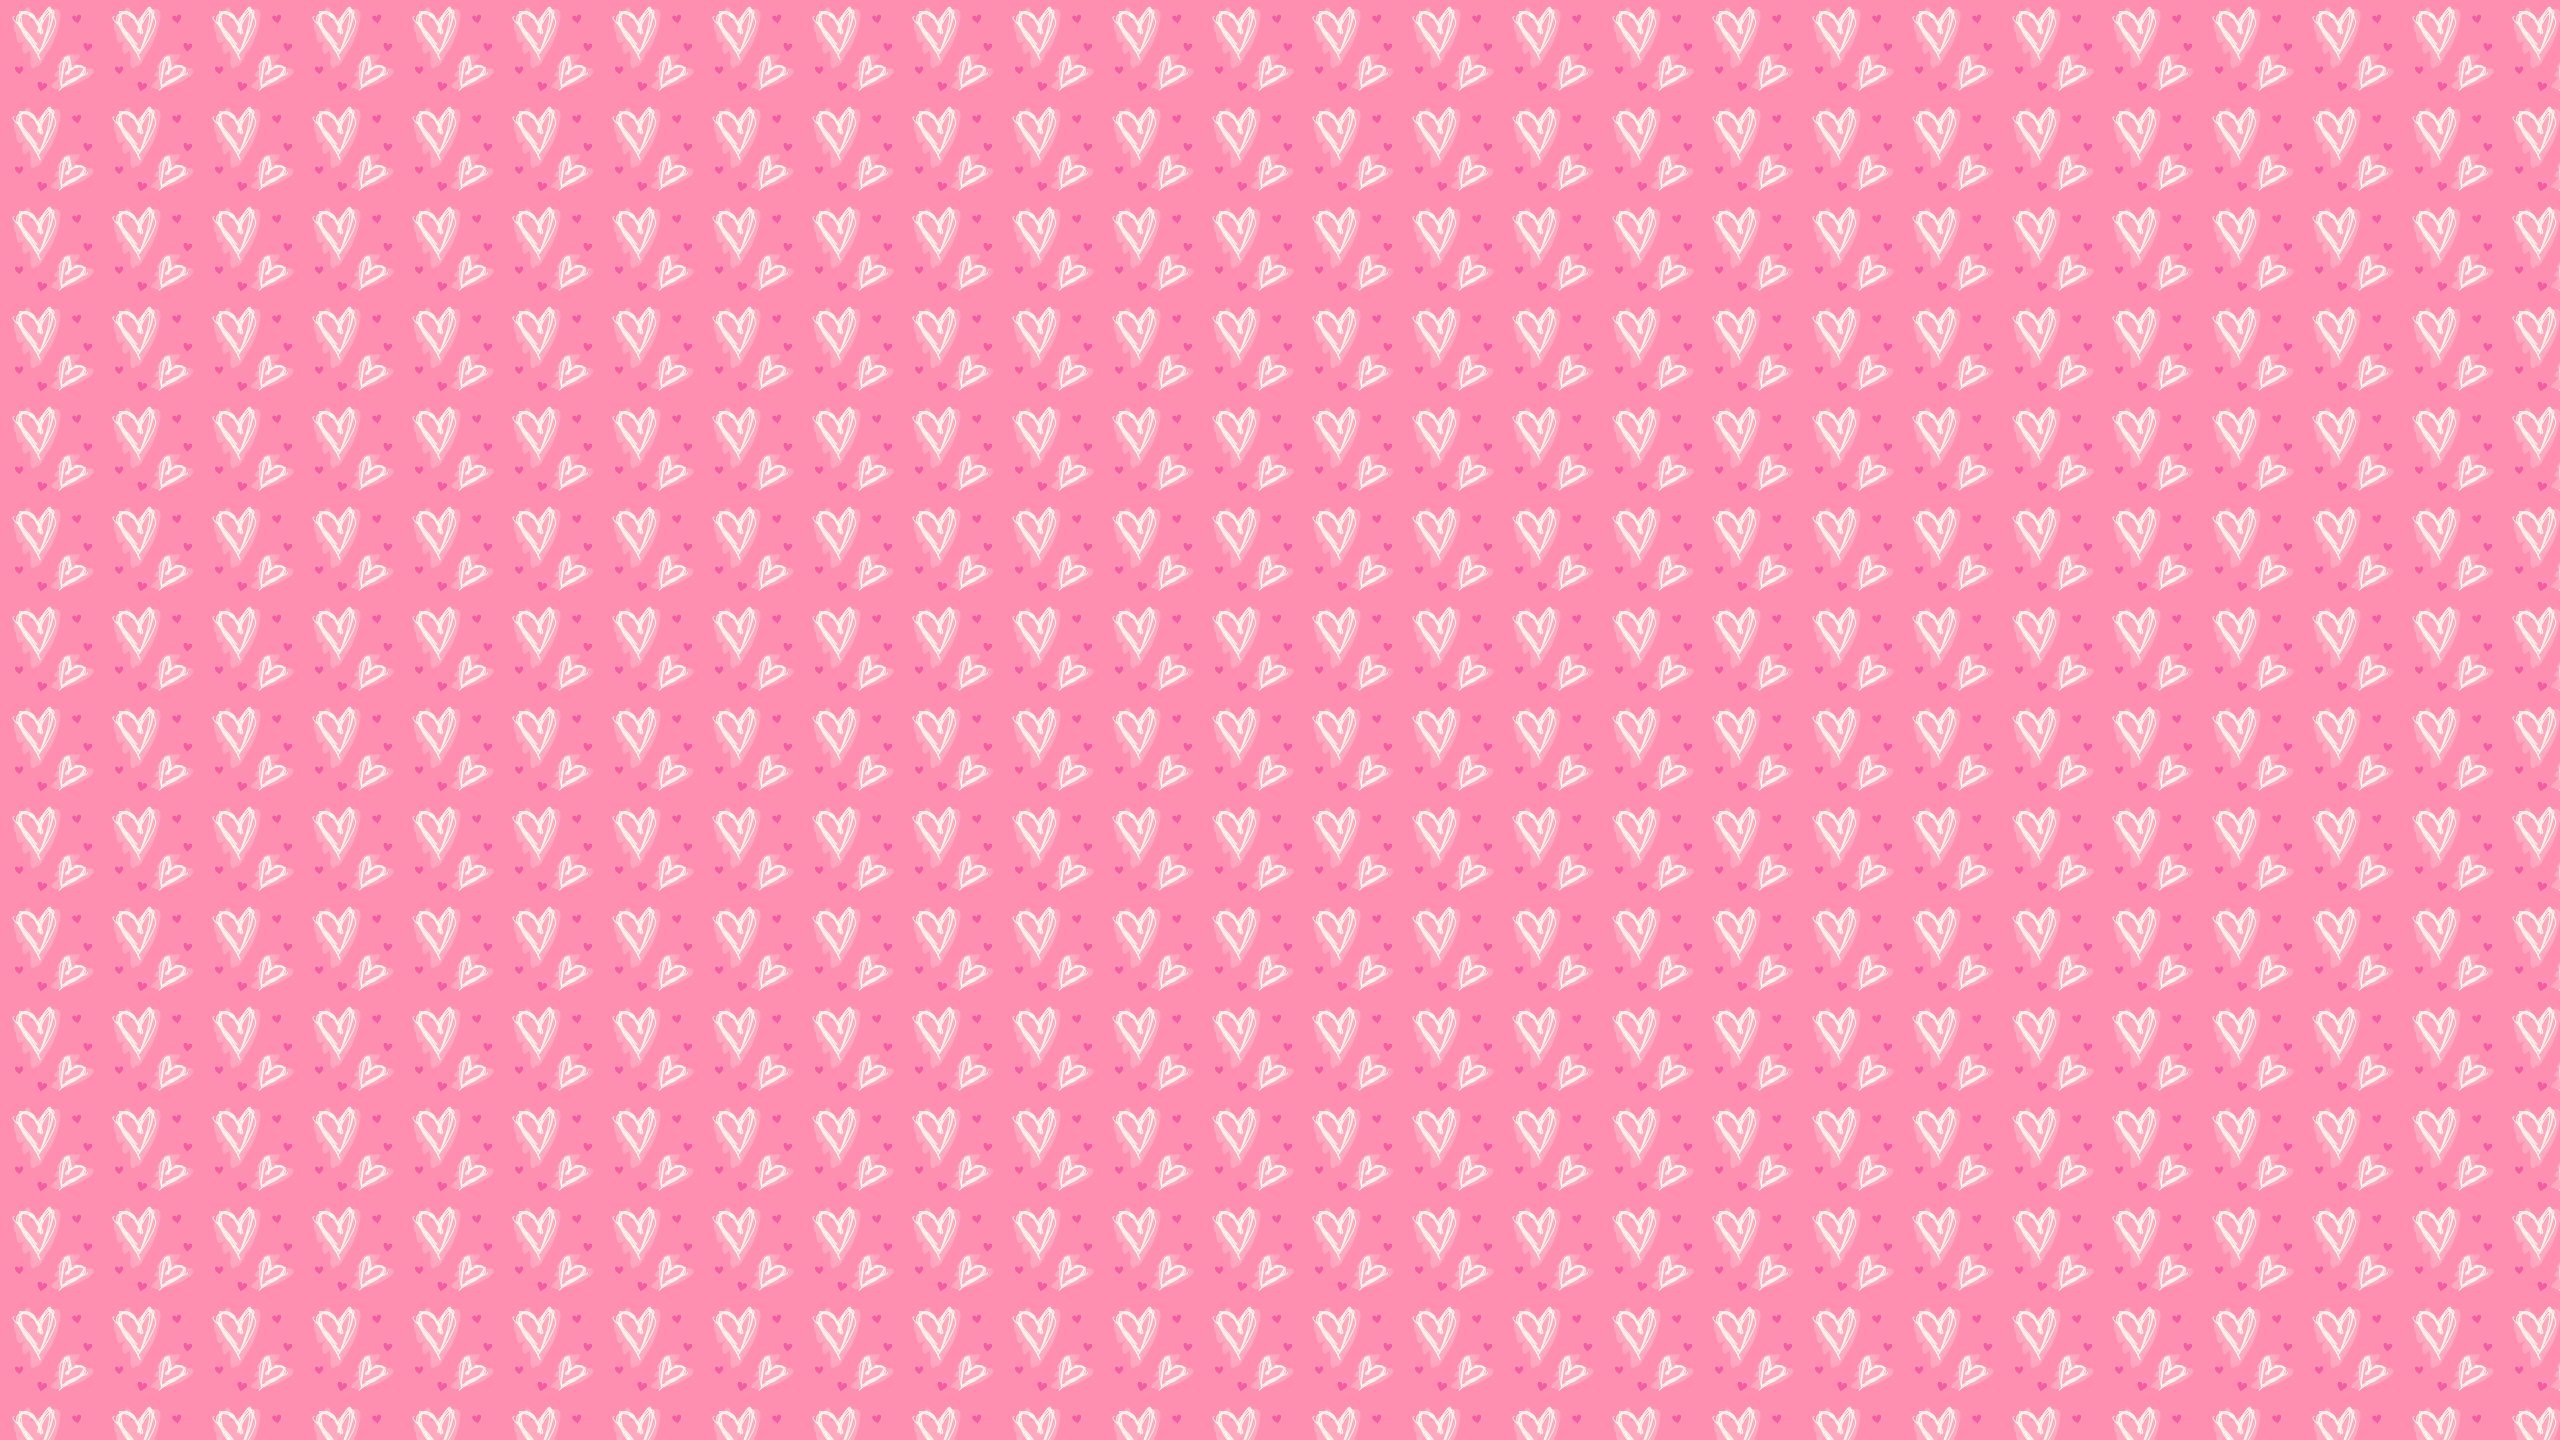 This Pinky Love Desktop Wallpaper Is Easy Just Save The